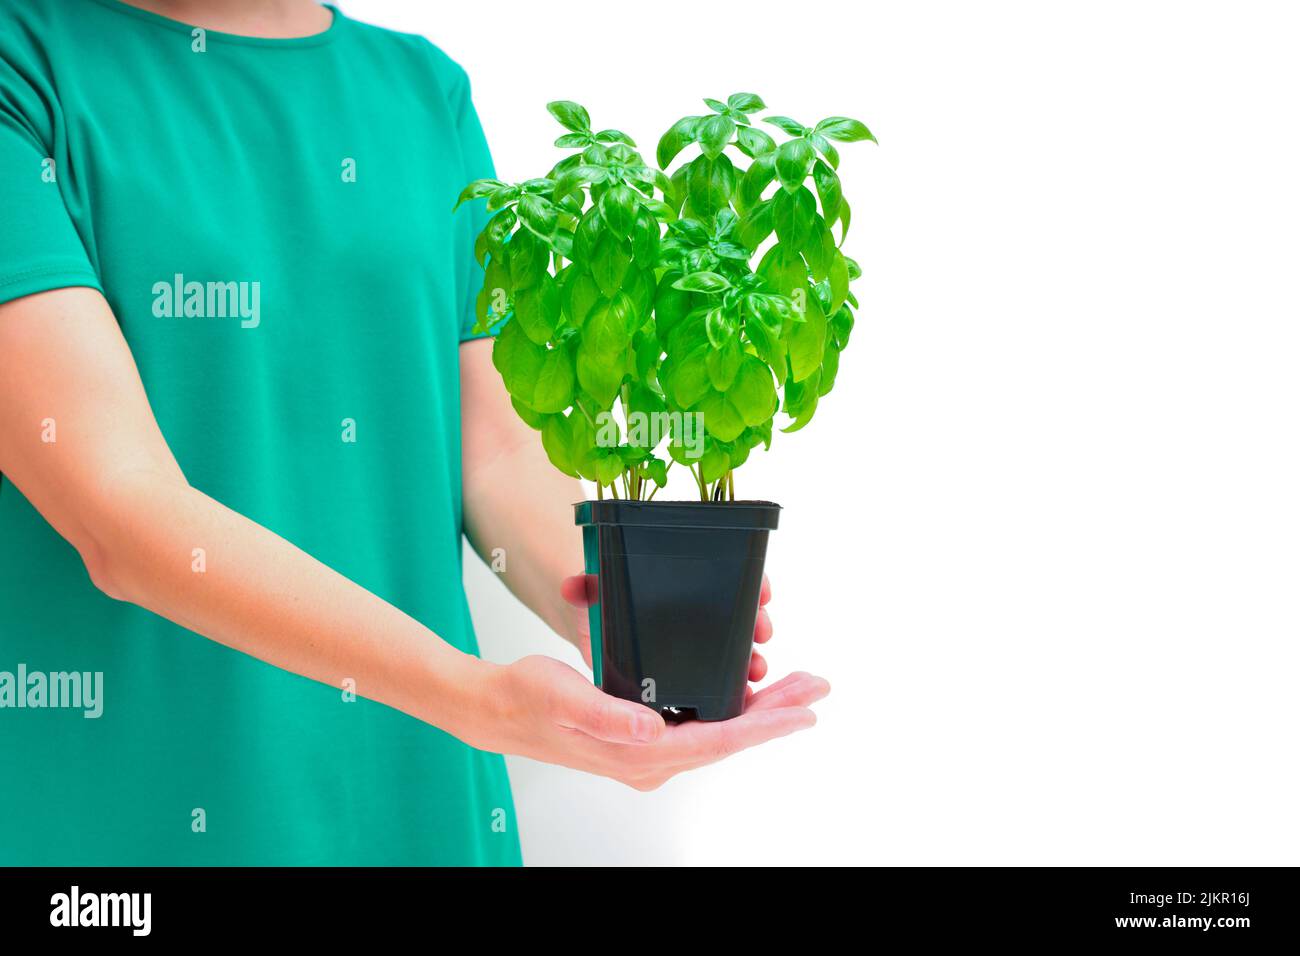 Woman wearing a green dress holds a basil bush in a planter isolated on white background with copy space. Stock Photo